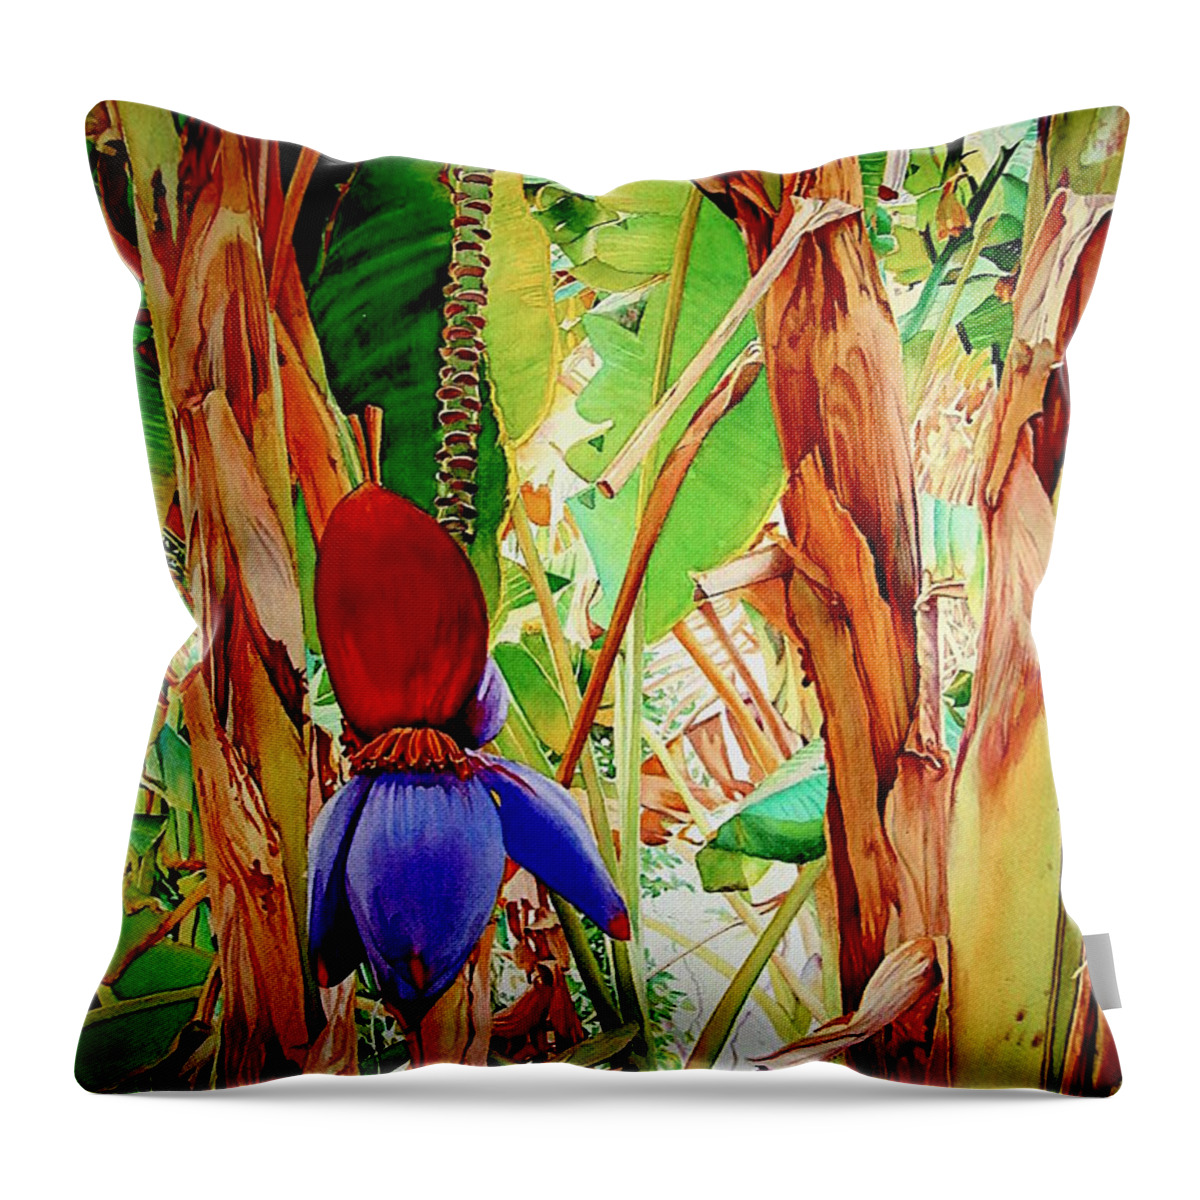 Corn Throw Pillow featuring the painting Banana flower by Francoise Chauray